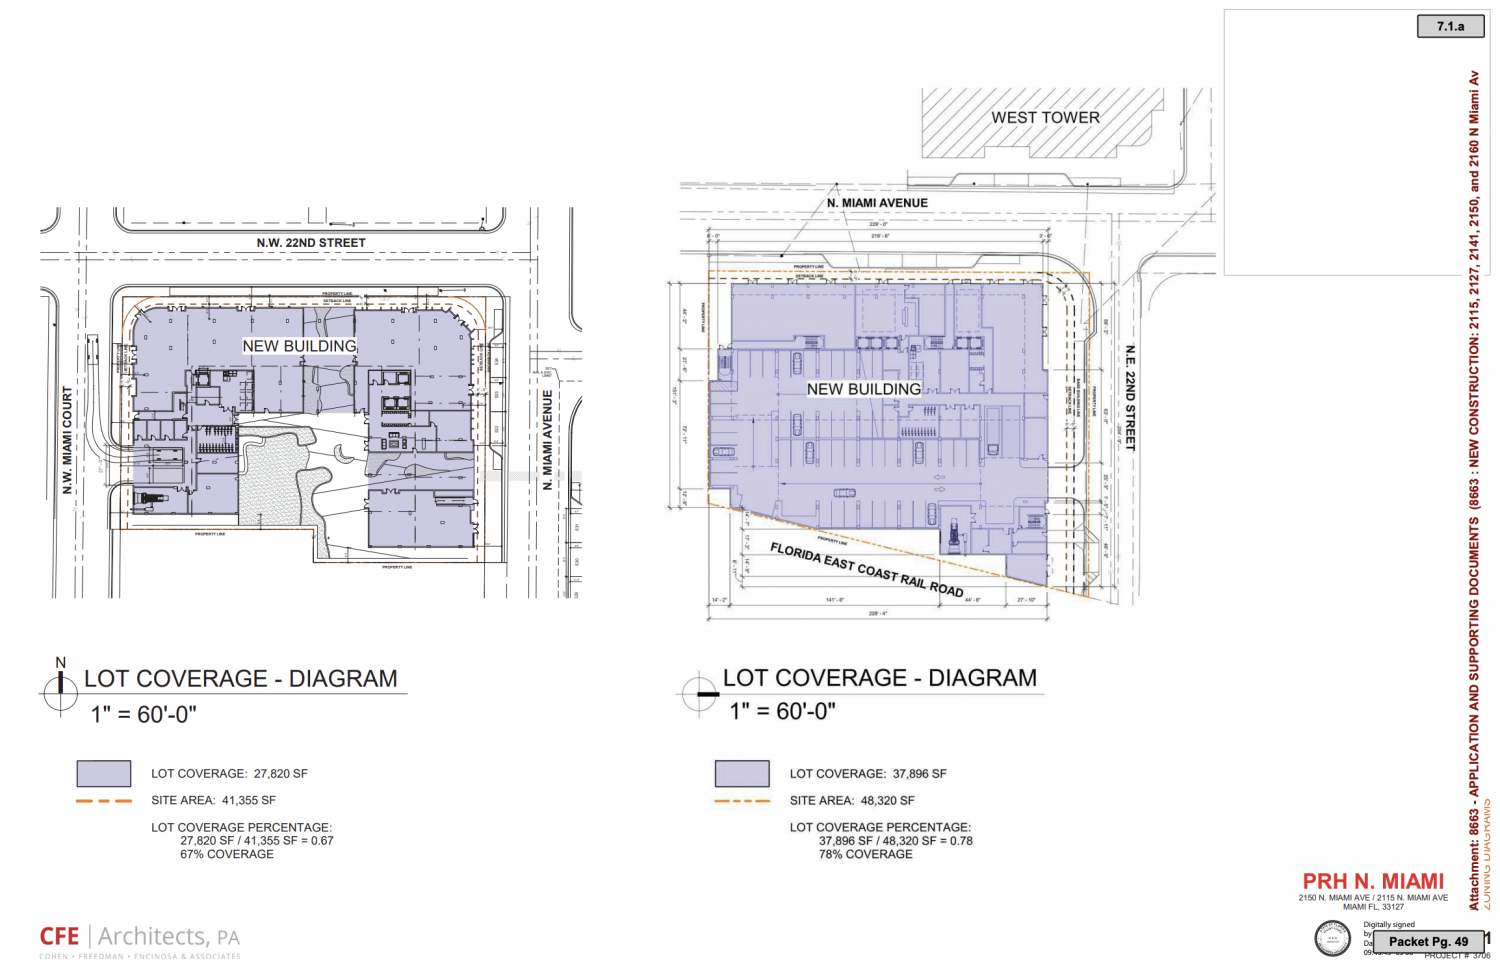 Lot Coverage of West and East site, courtesy of CFE Architects